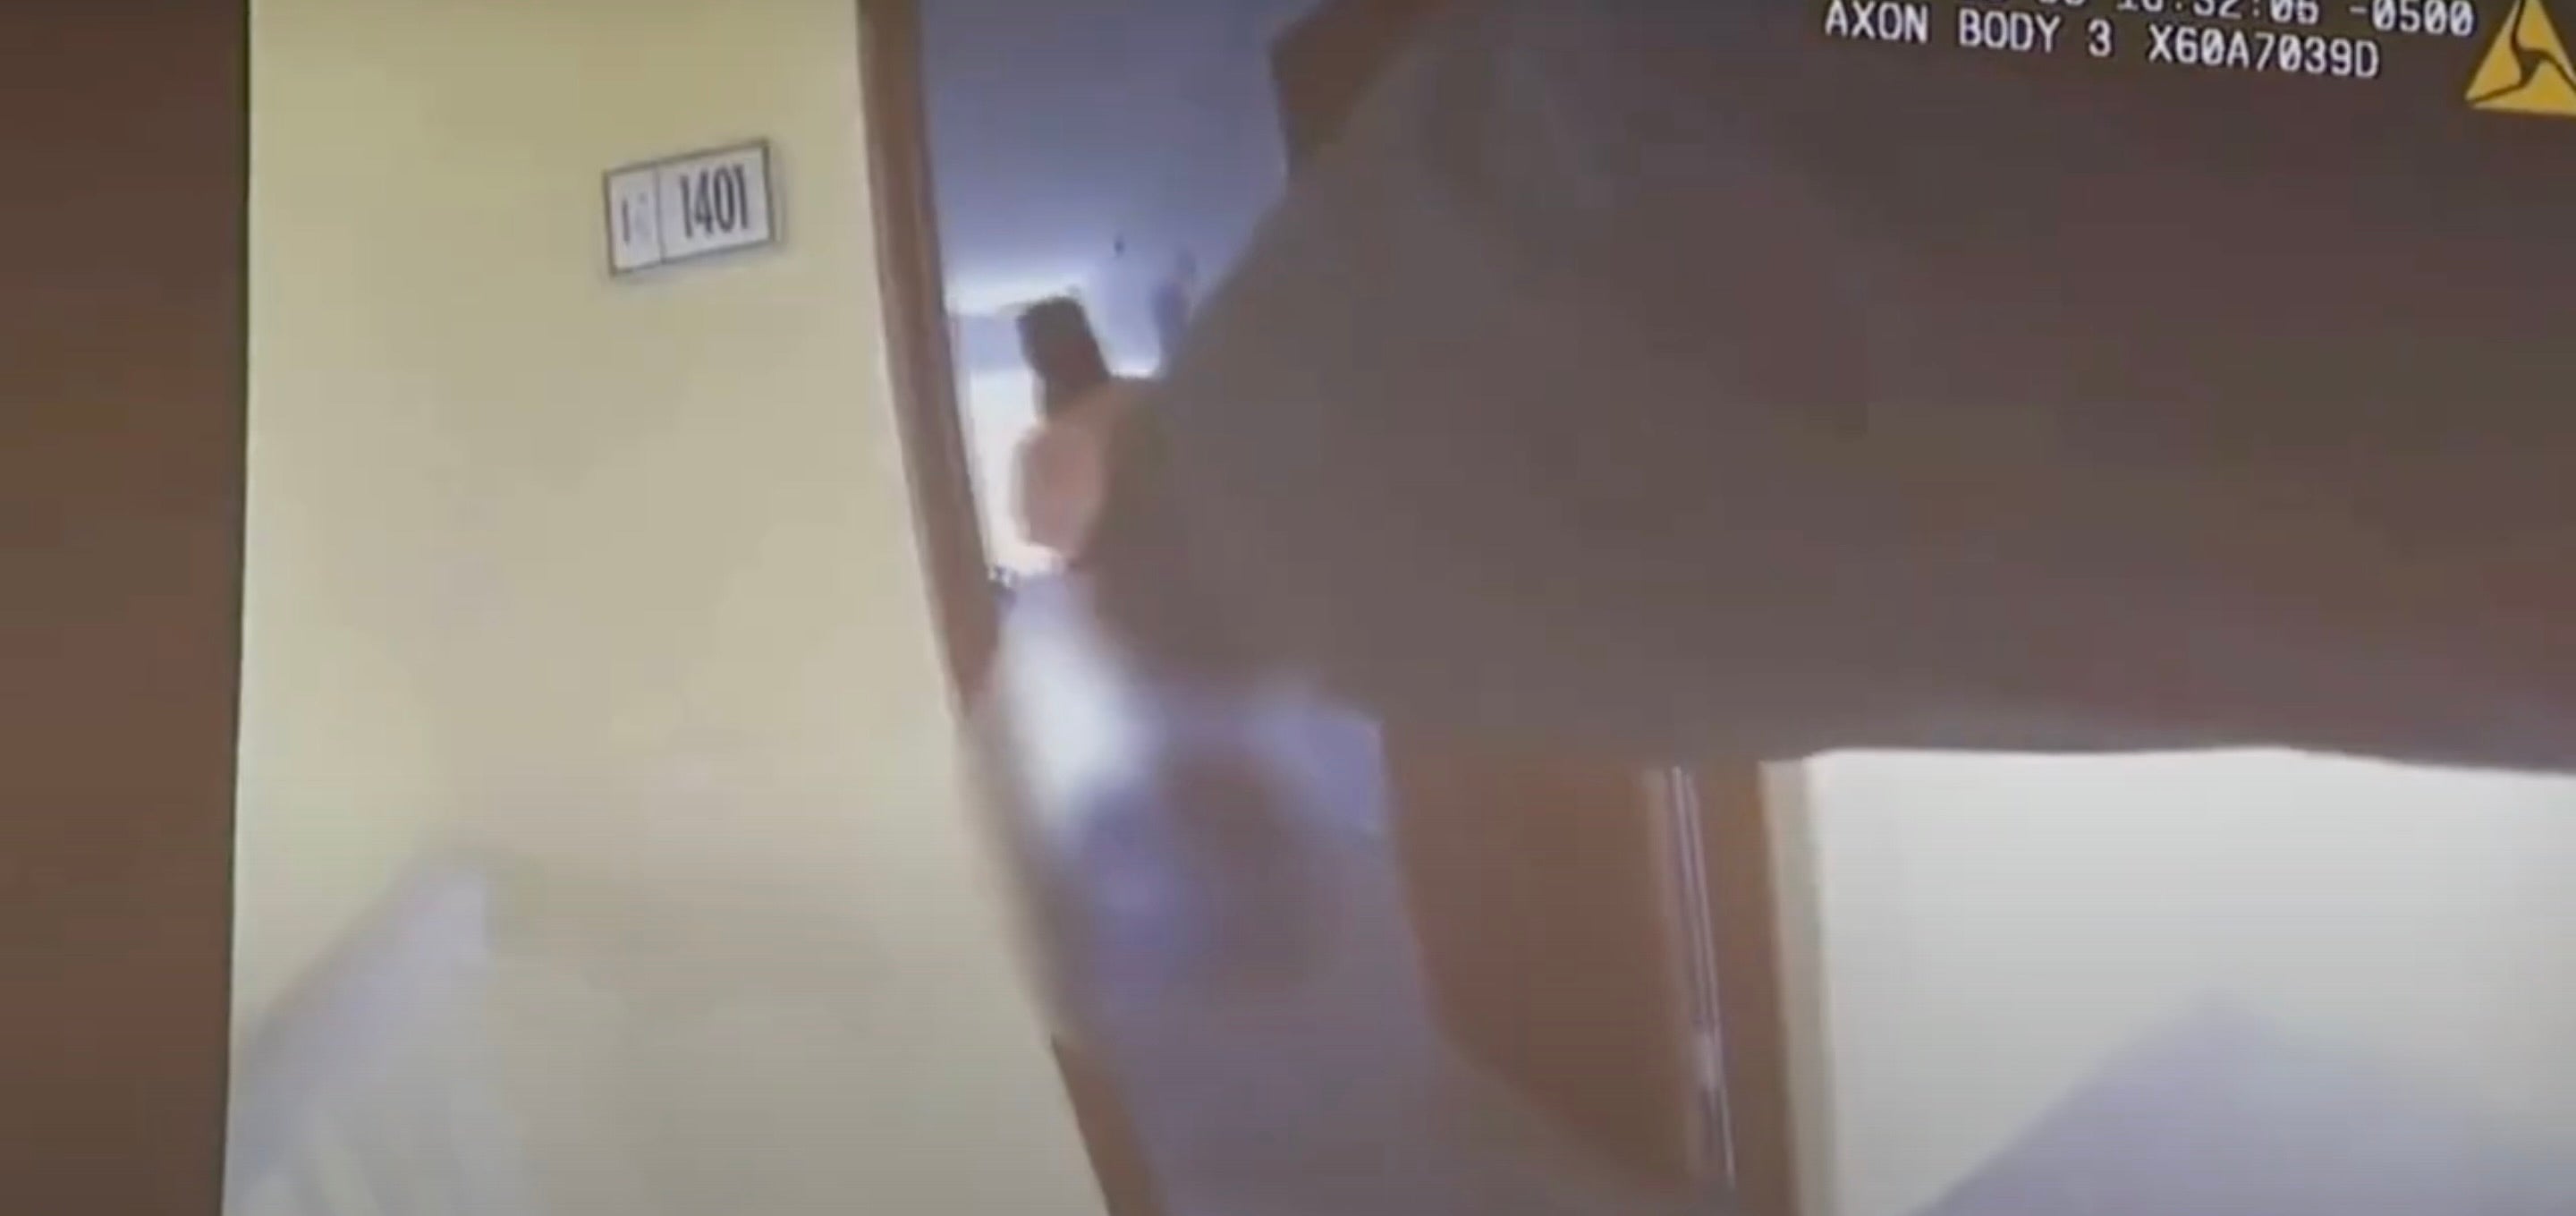 The Okaloosa County Sheriff’s Office released bodycam footage in the shooting of Air Force service member Roger Fortson on Thursday